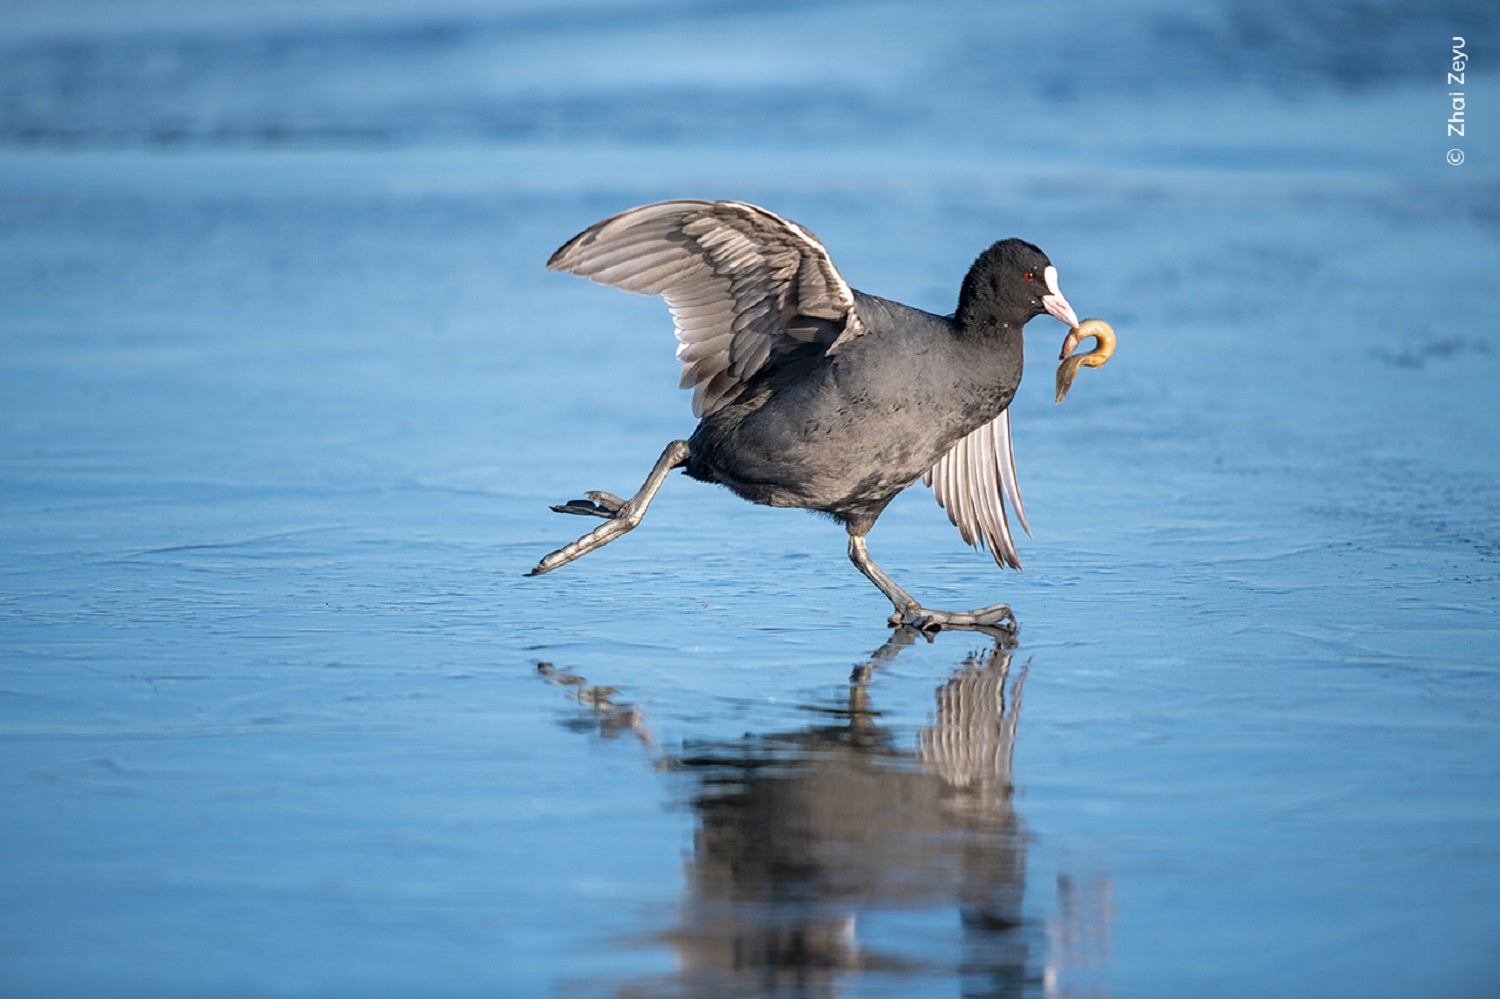 Common coot bird wading across icy water